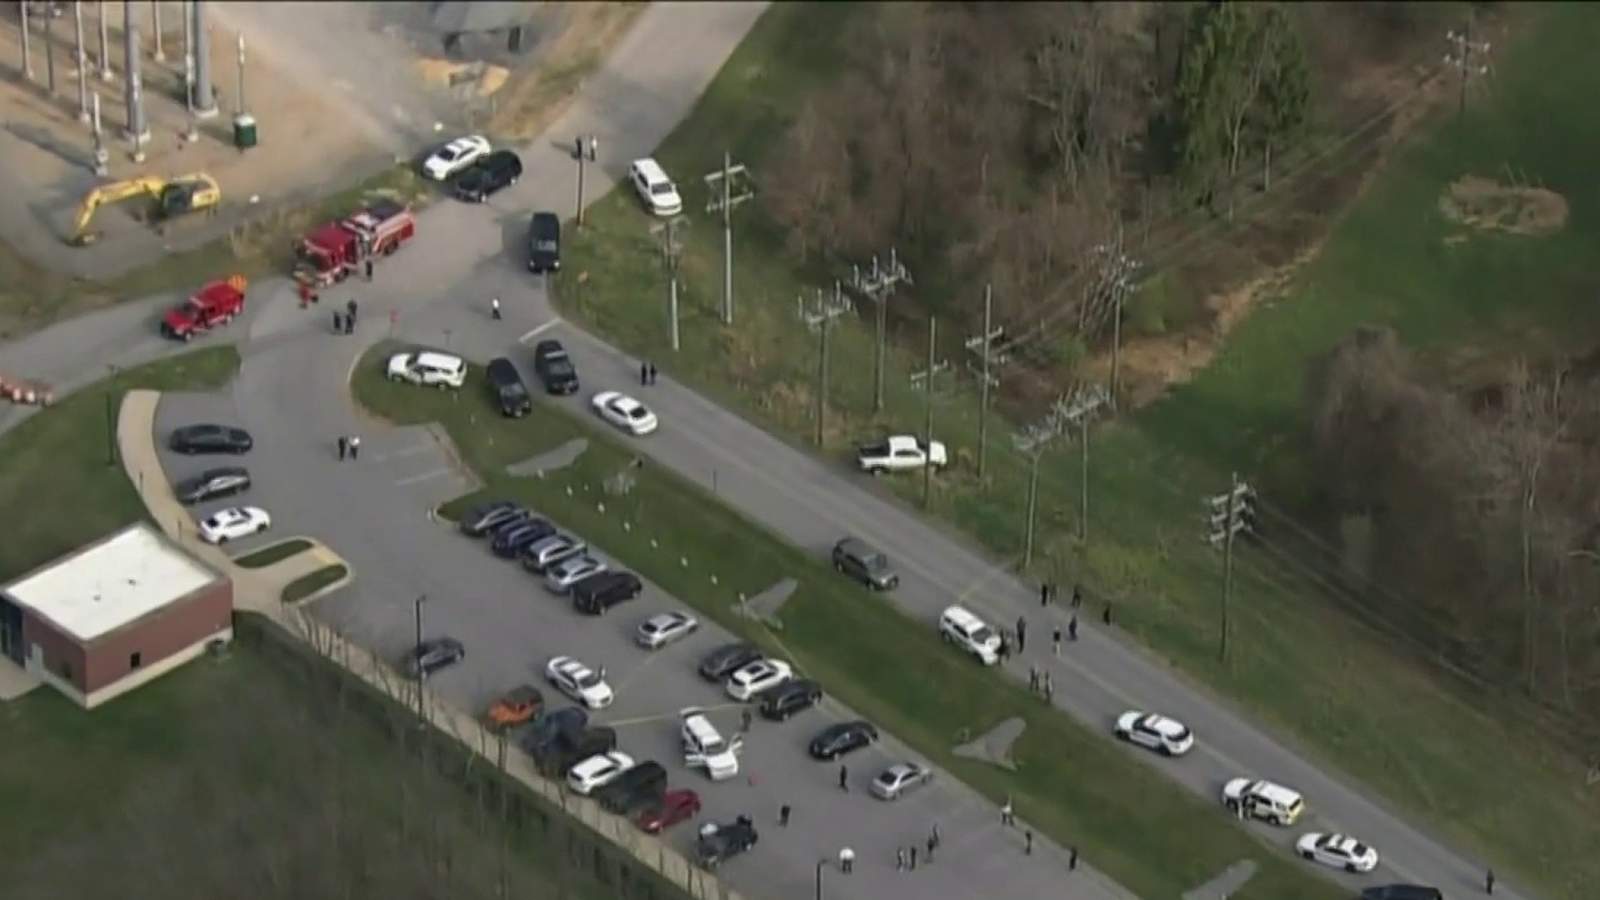 2 critically injured, ‘active shooter’ killed at Fort Detrick in Maryland